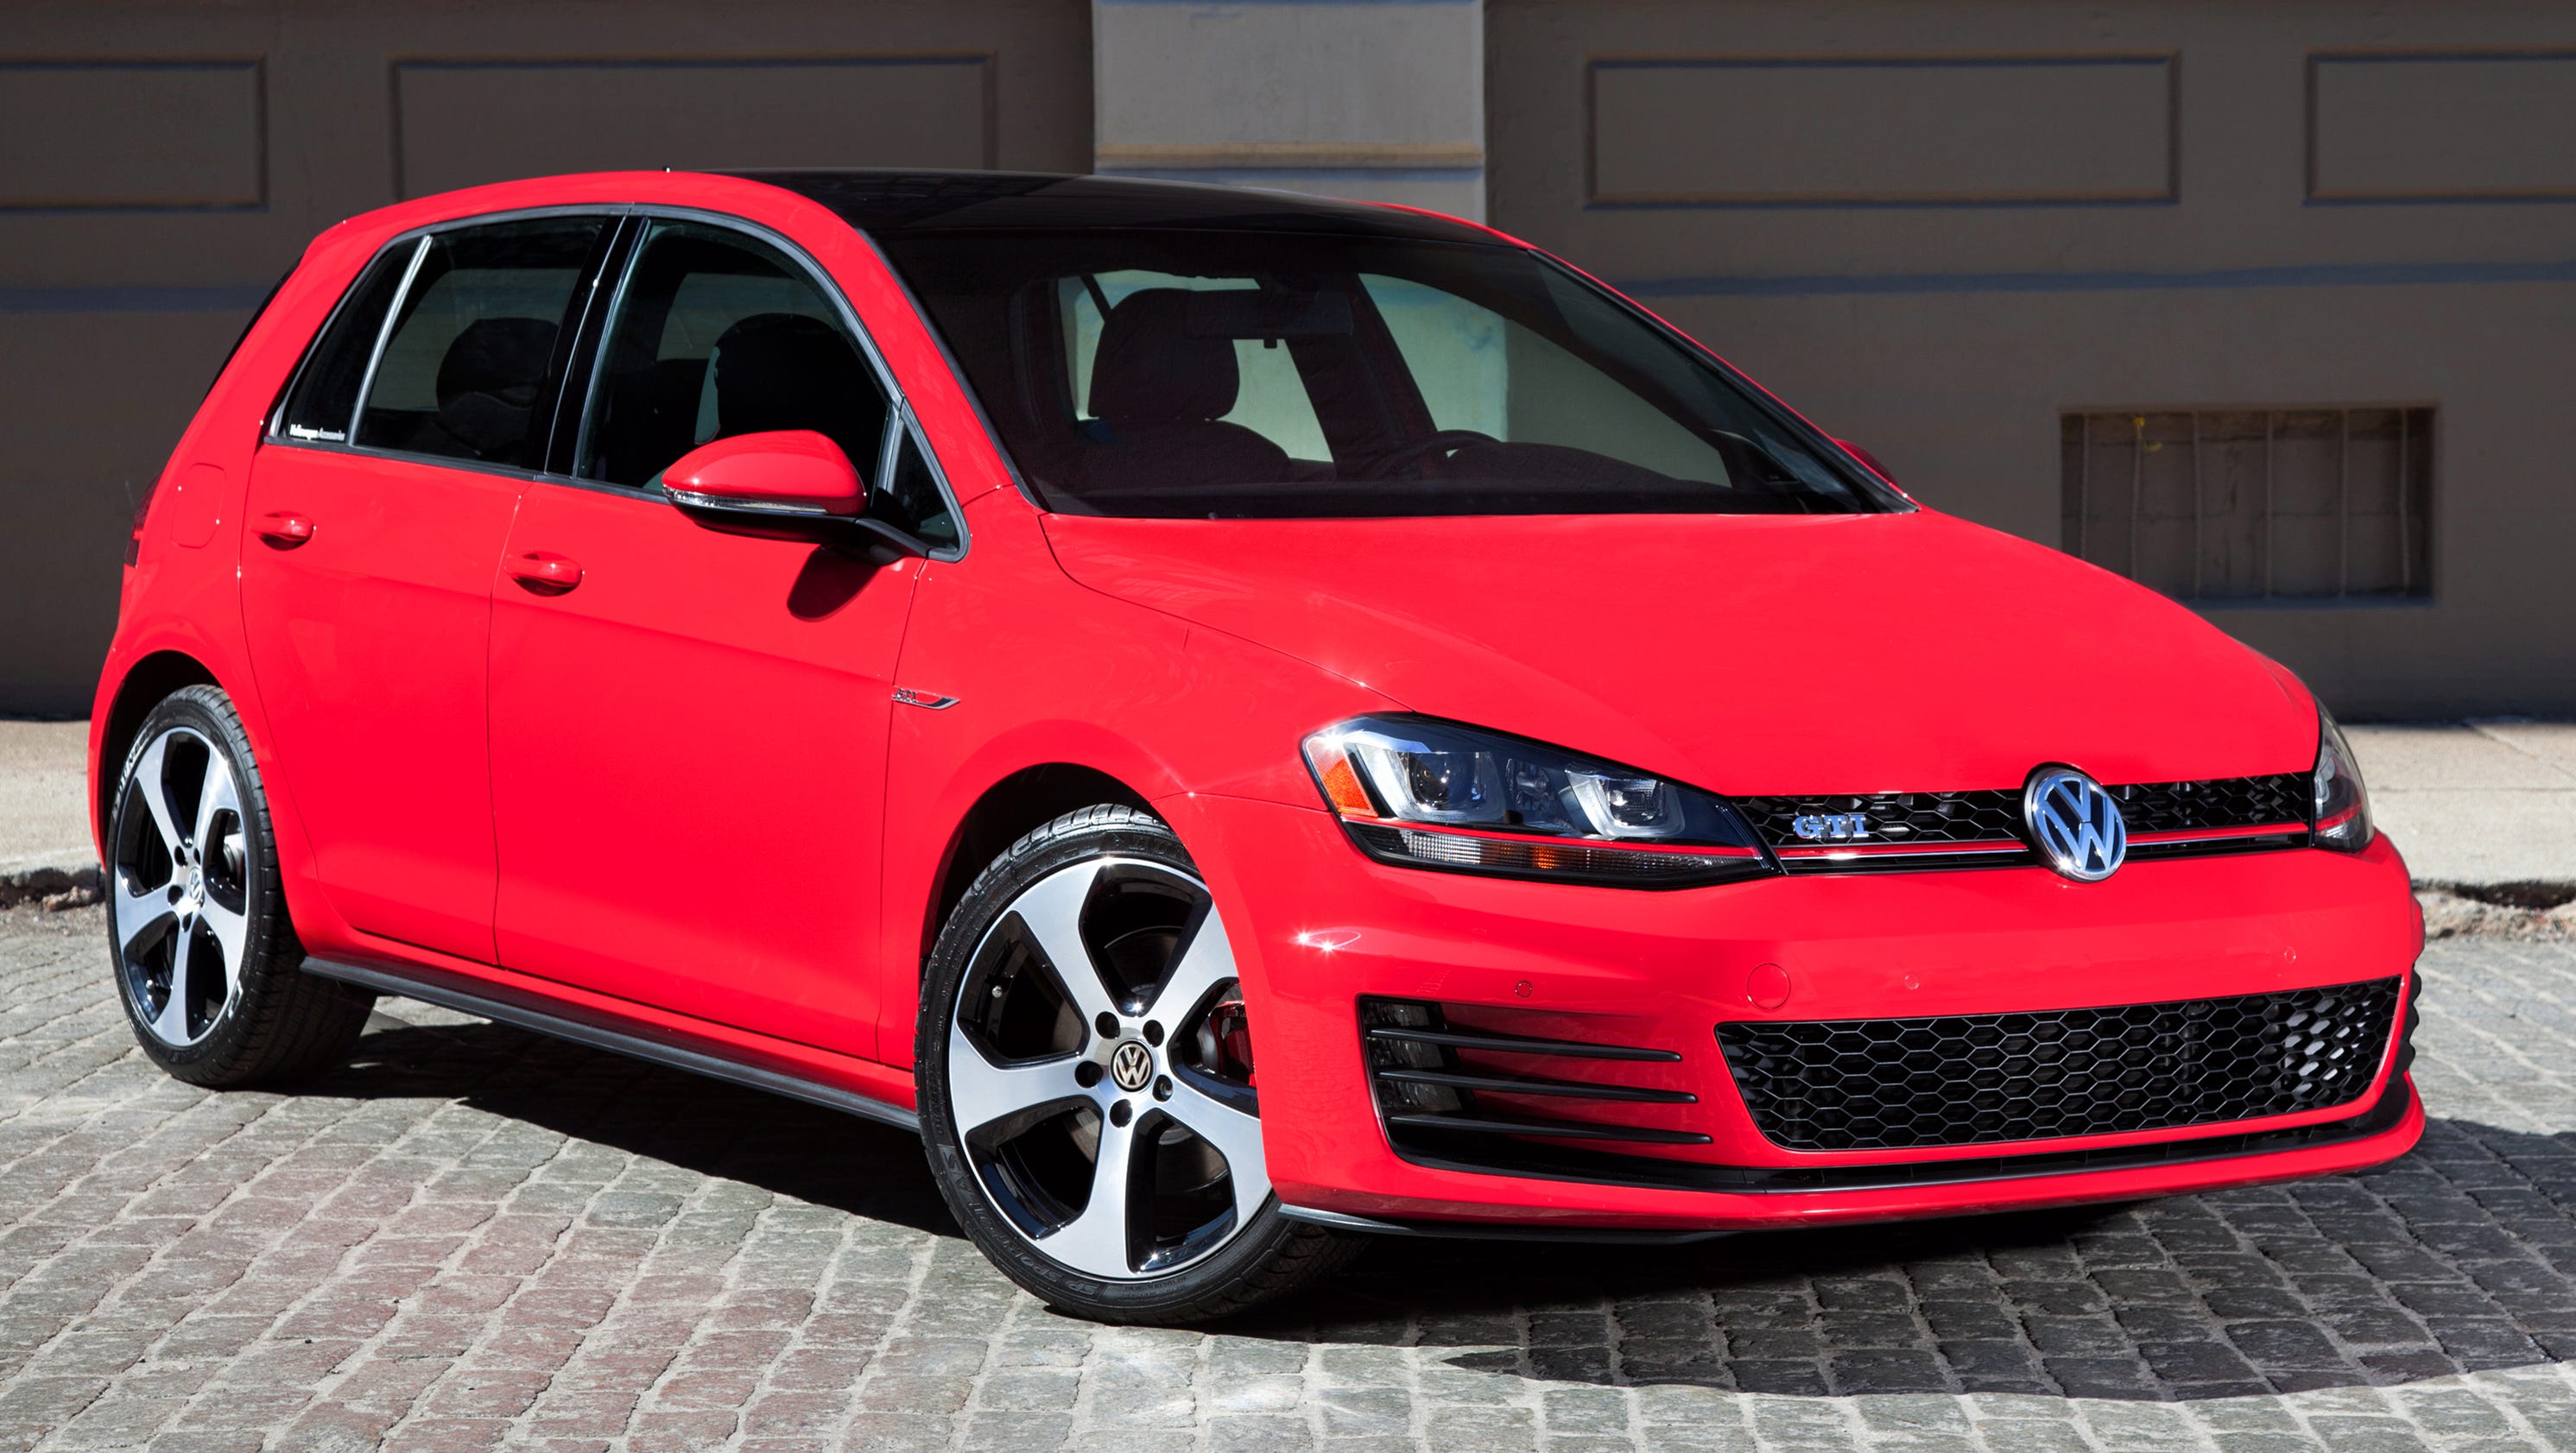 The redesigned 2015 VW Golf TSI, TDI and GTI